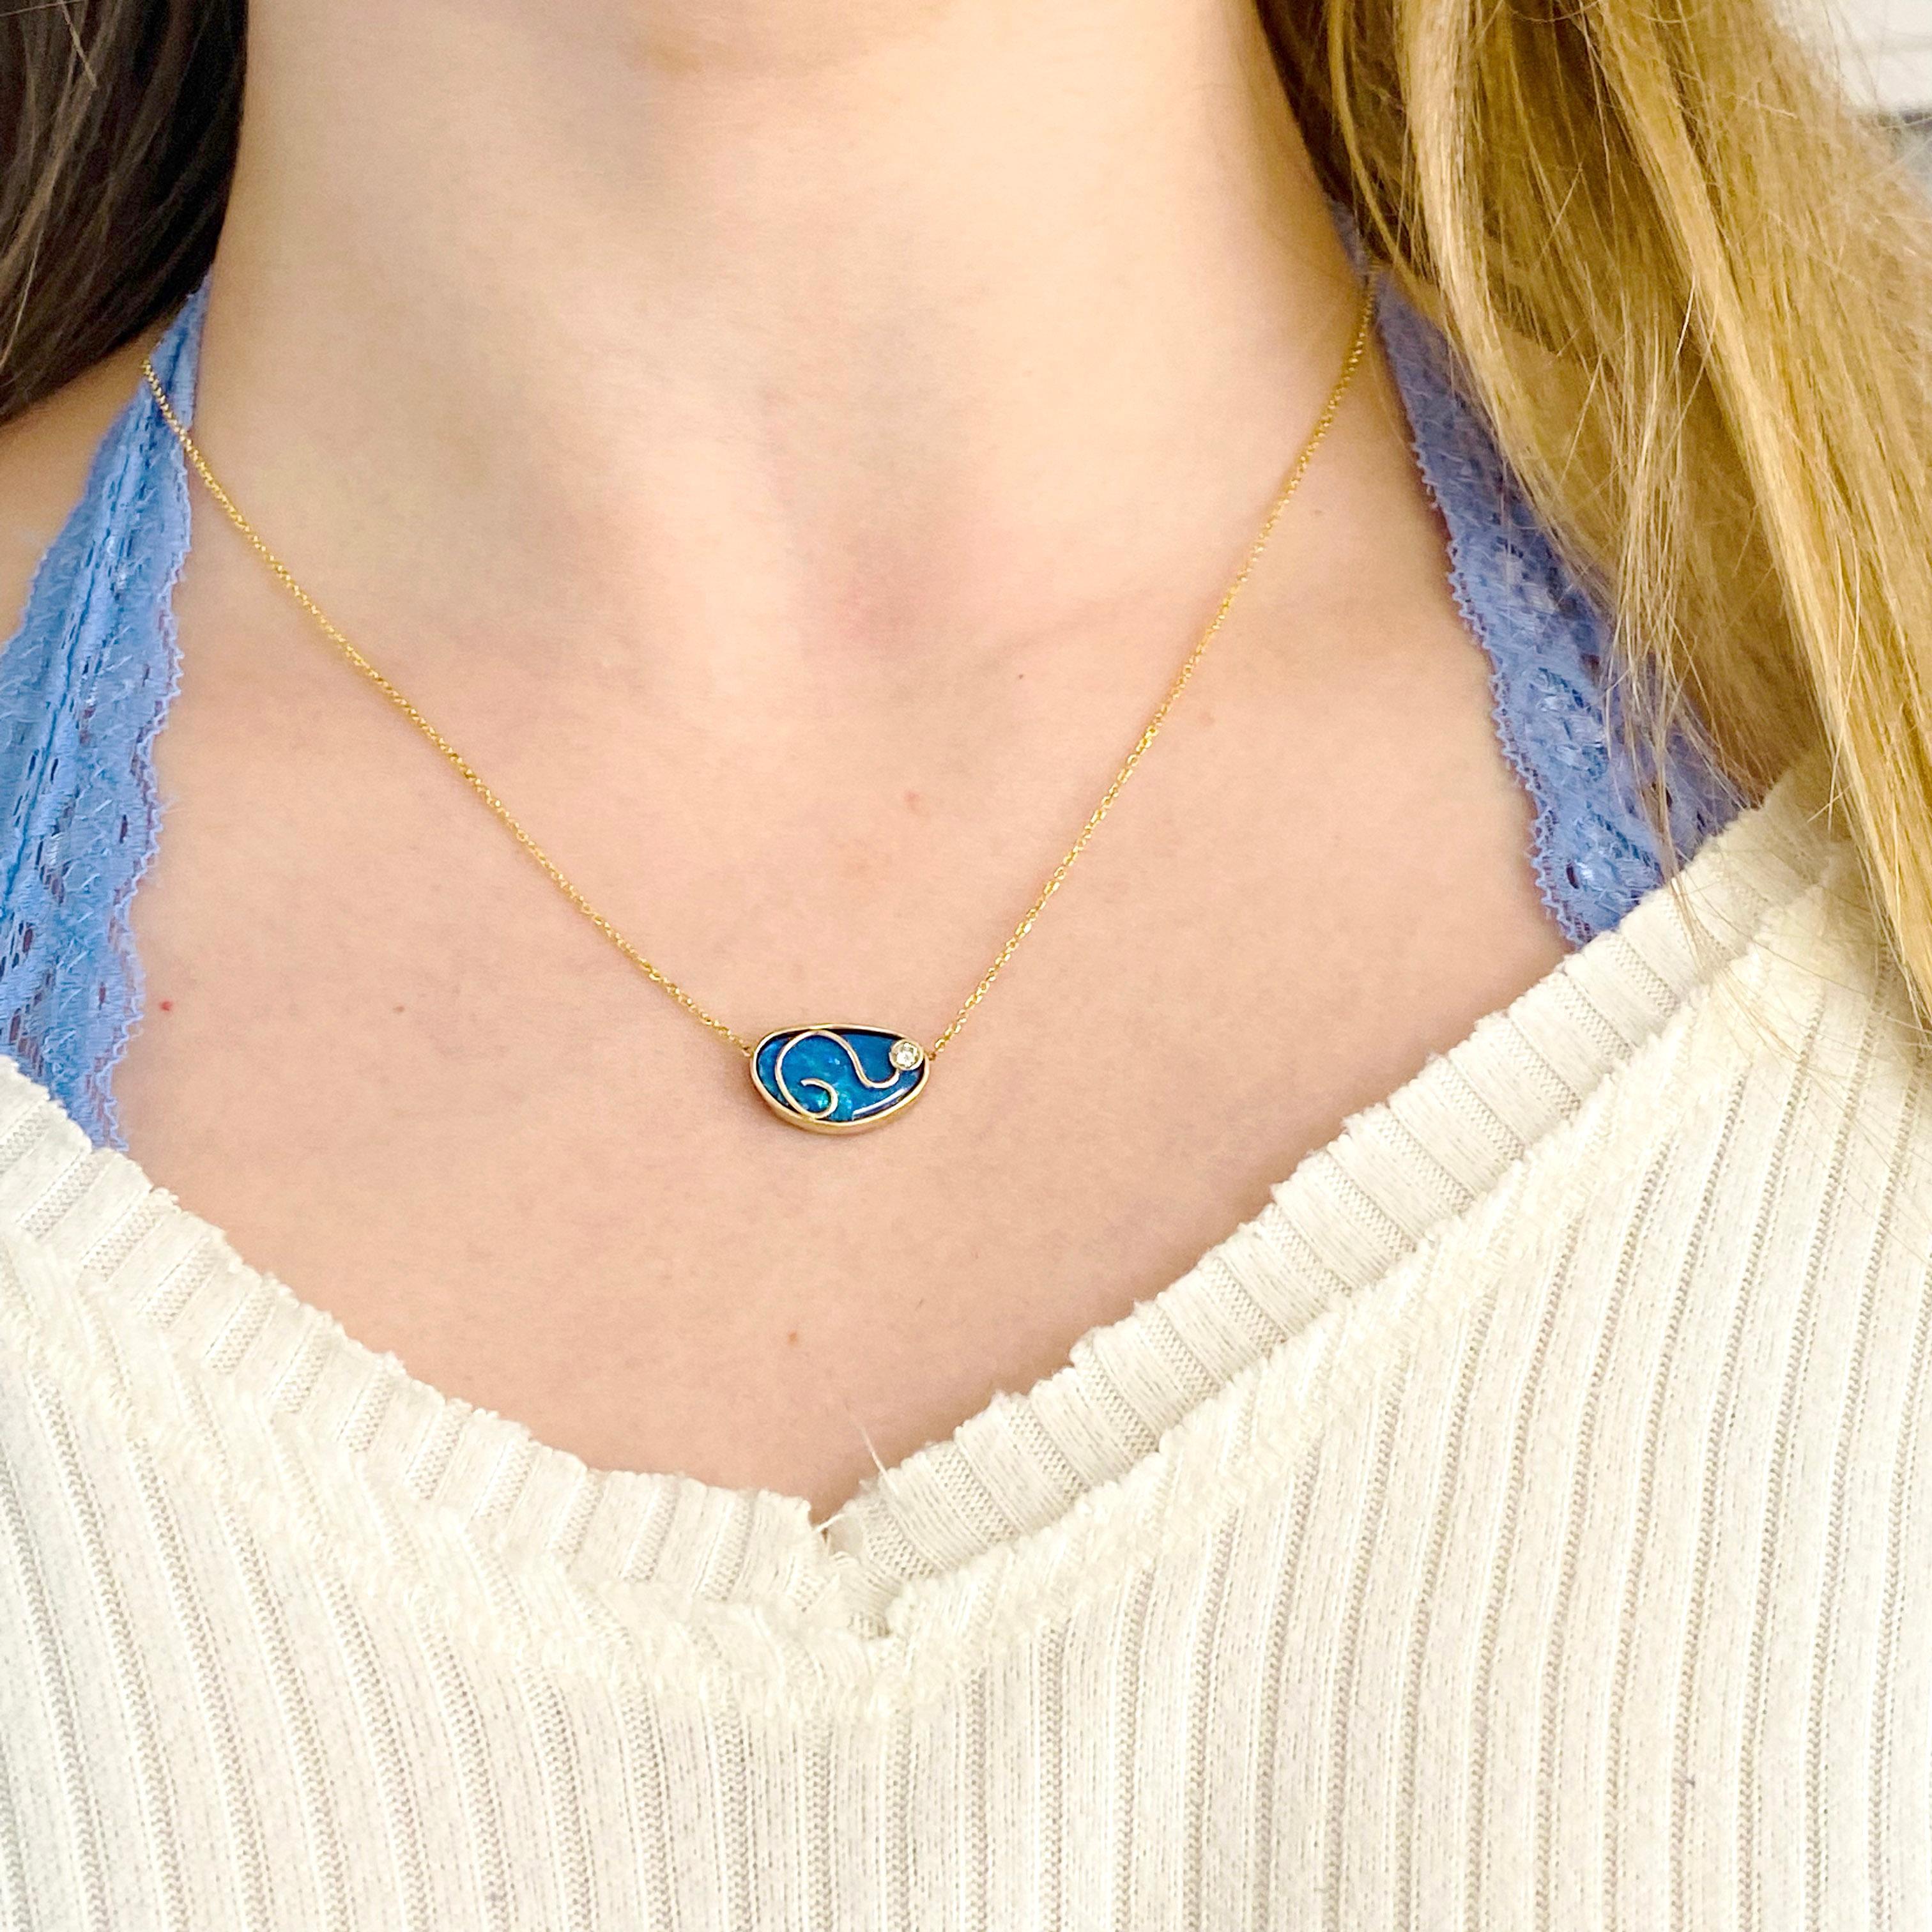 This opal and diamond necklace has been hand fabricated and is gorgeous on. It has a beautiful black opal in the center with a 14 karat yellow gold bezel around it. The blue fire of the opal is amazing and the designer chose to put a 14 karat gold